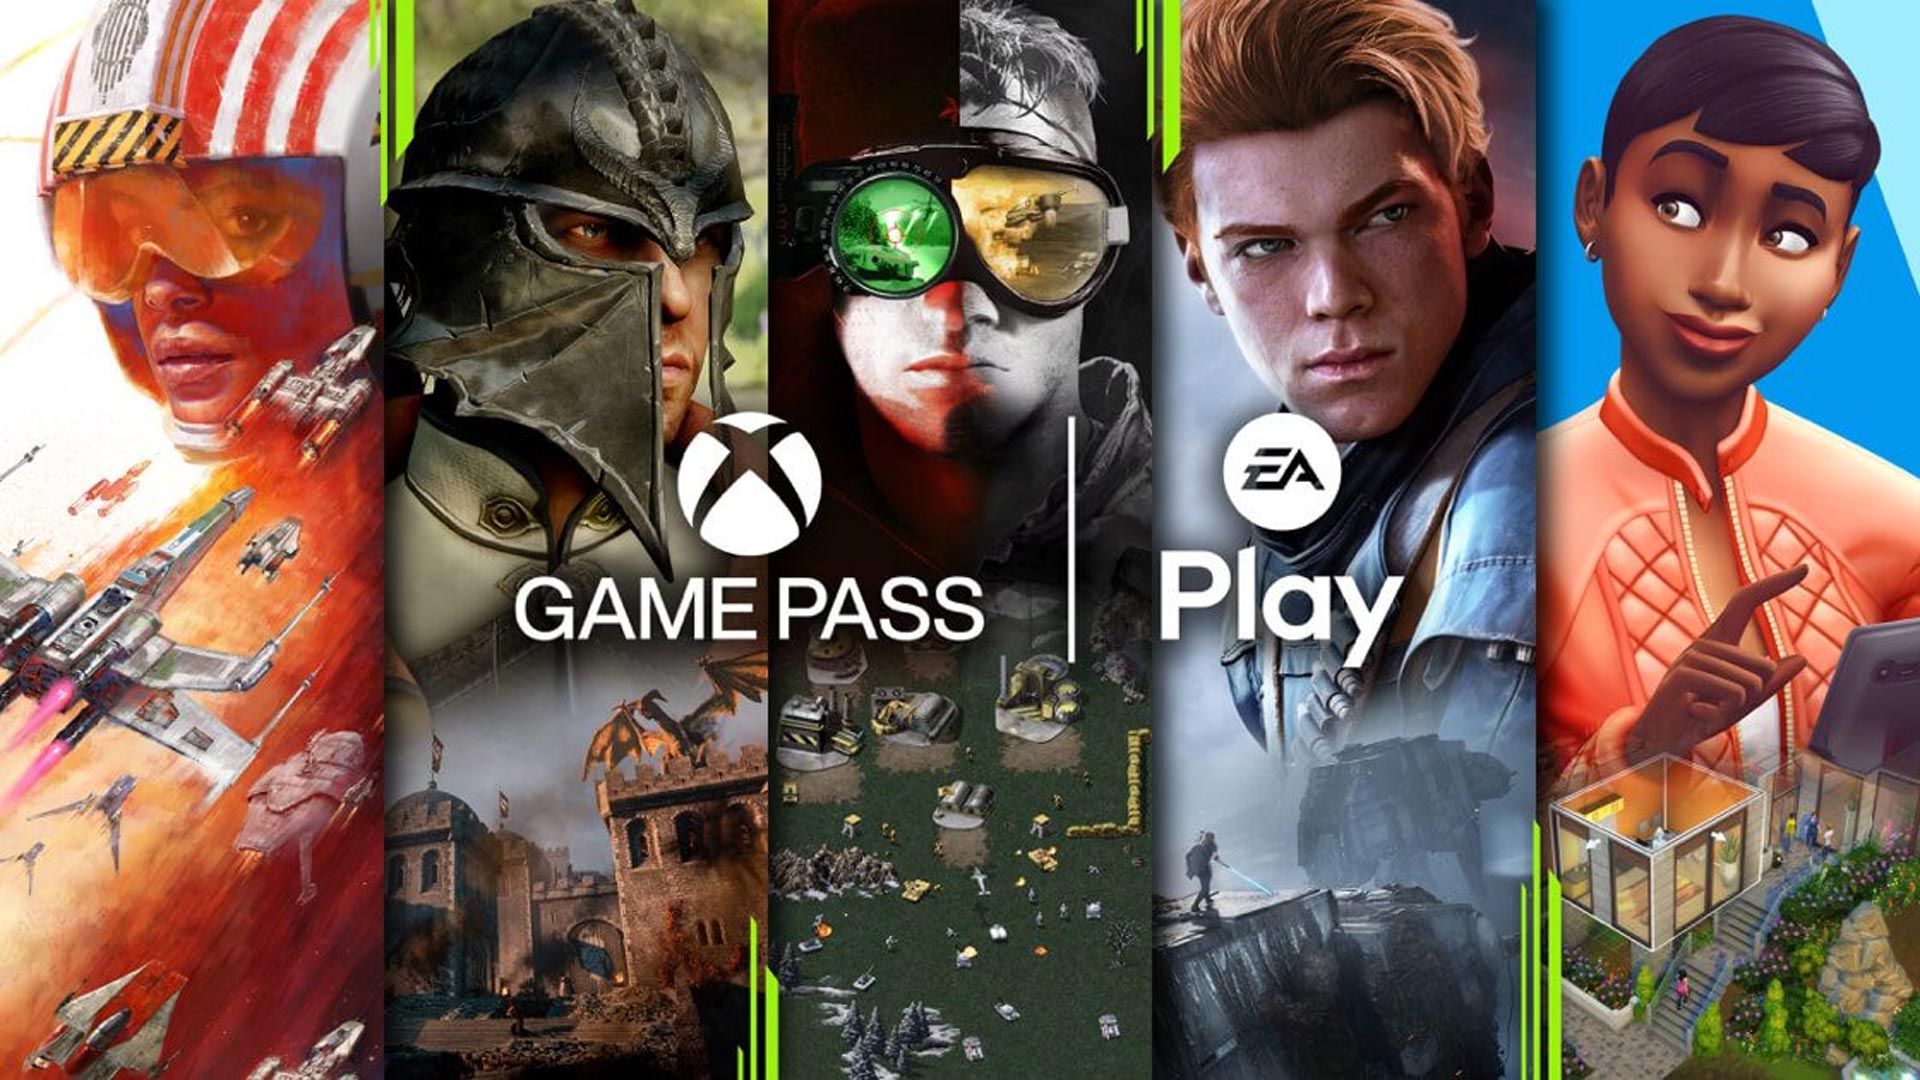 is ea play included with game pass pc